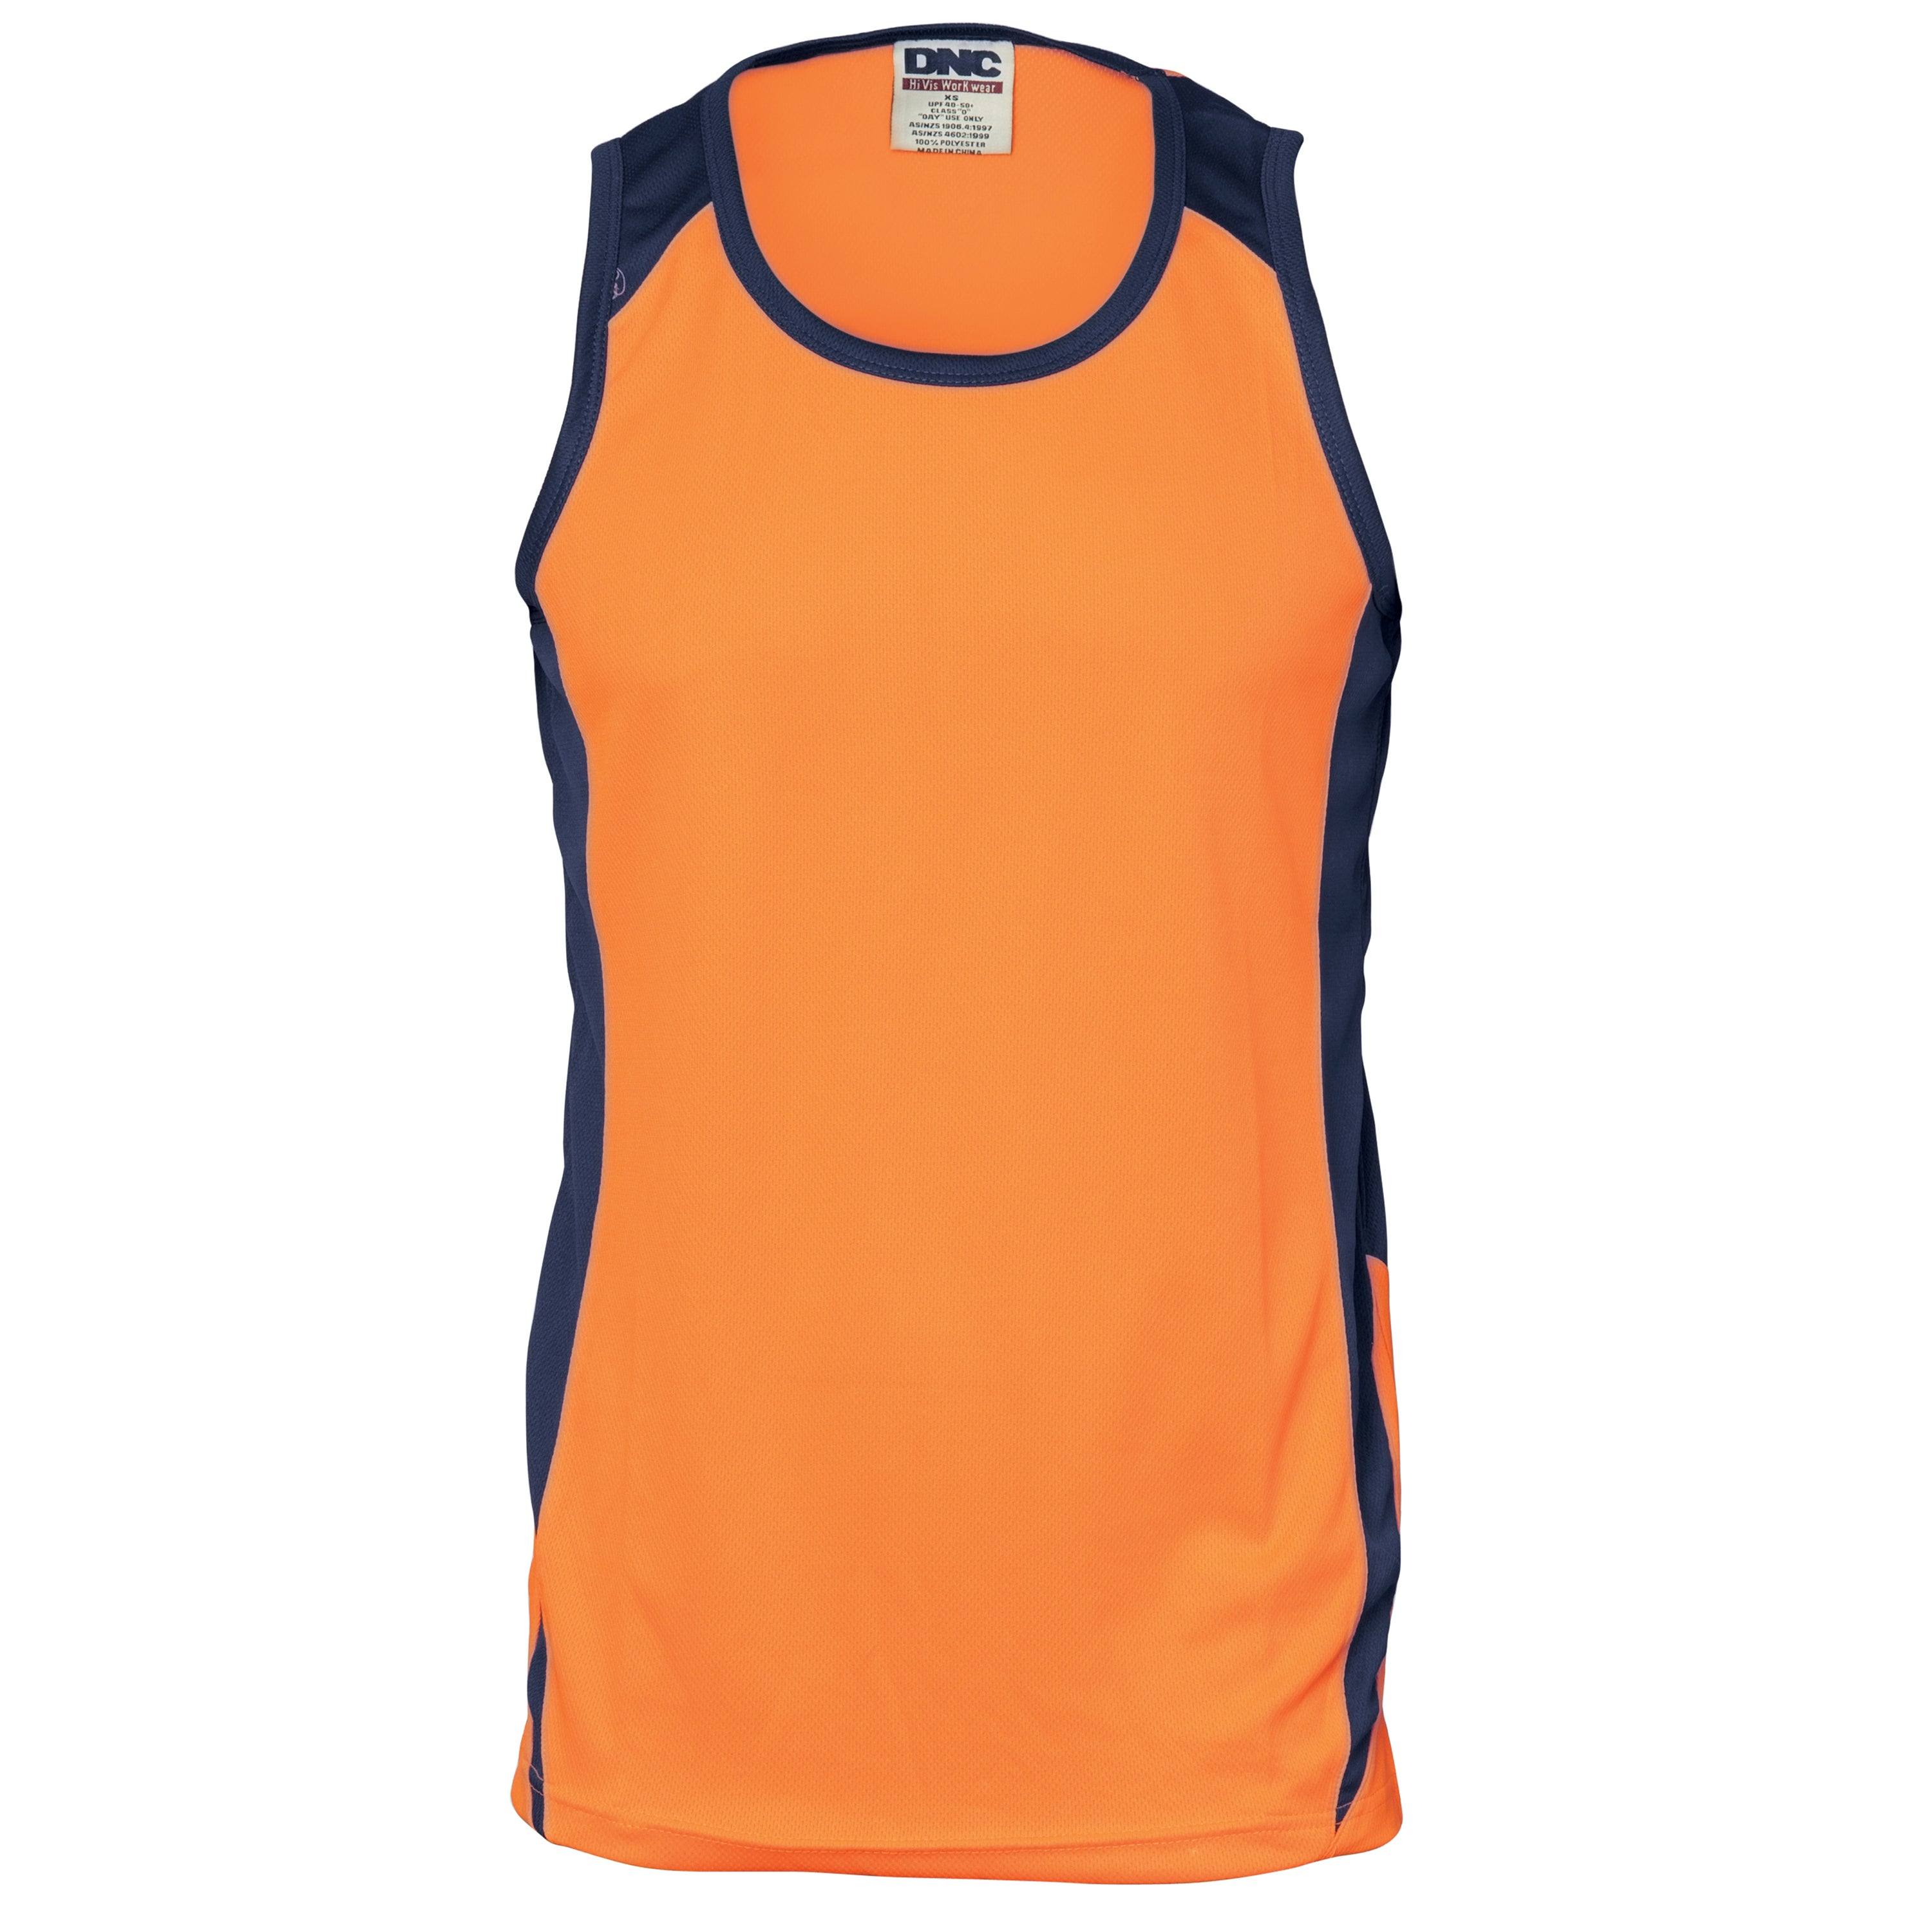 Cool Breathe Action Singlet 3842 - Printibly